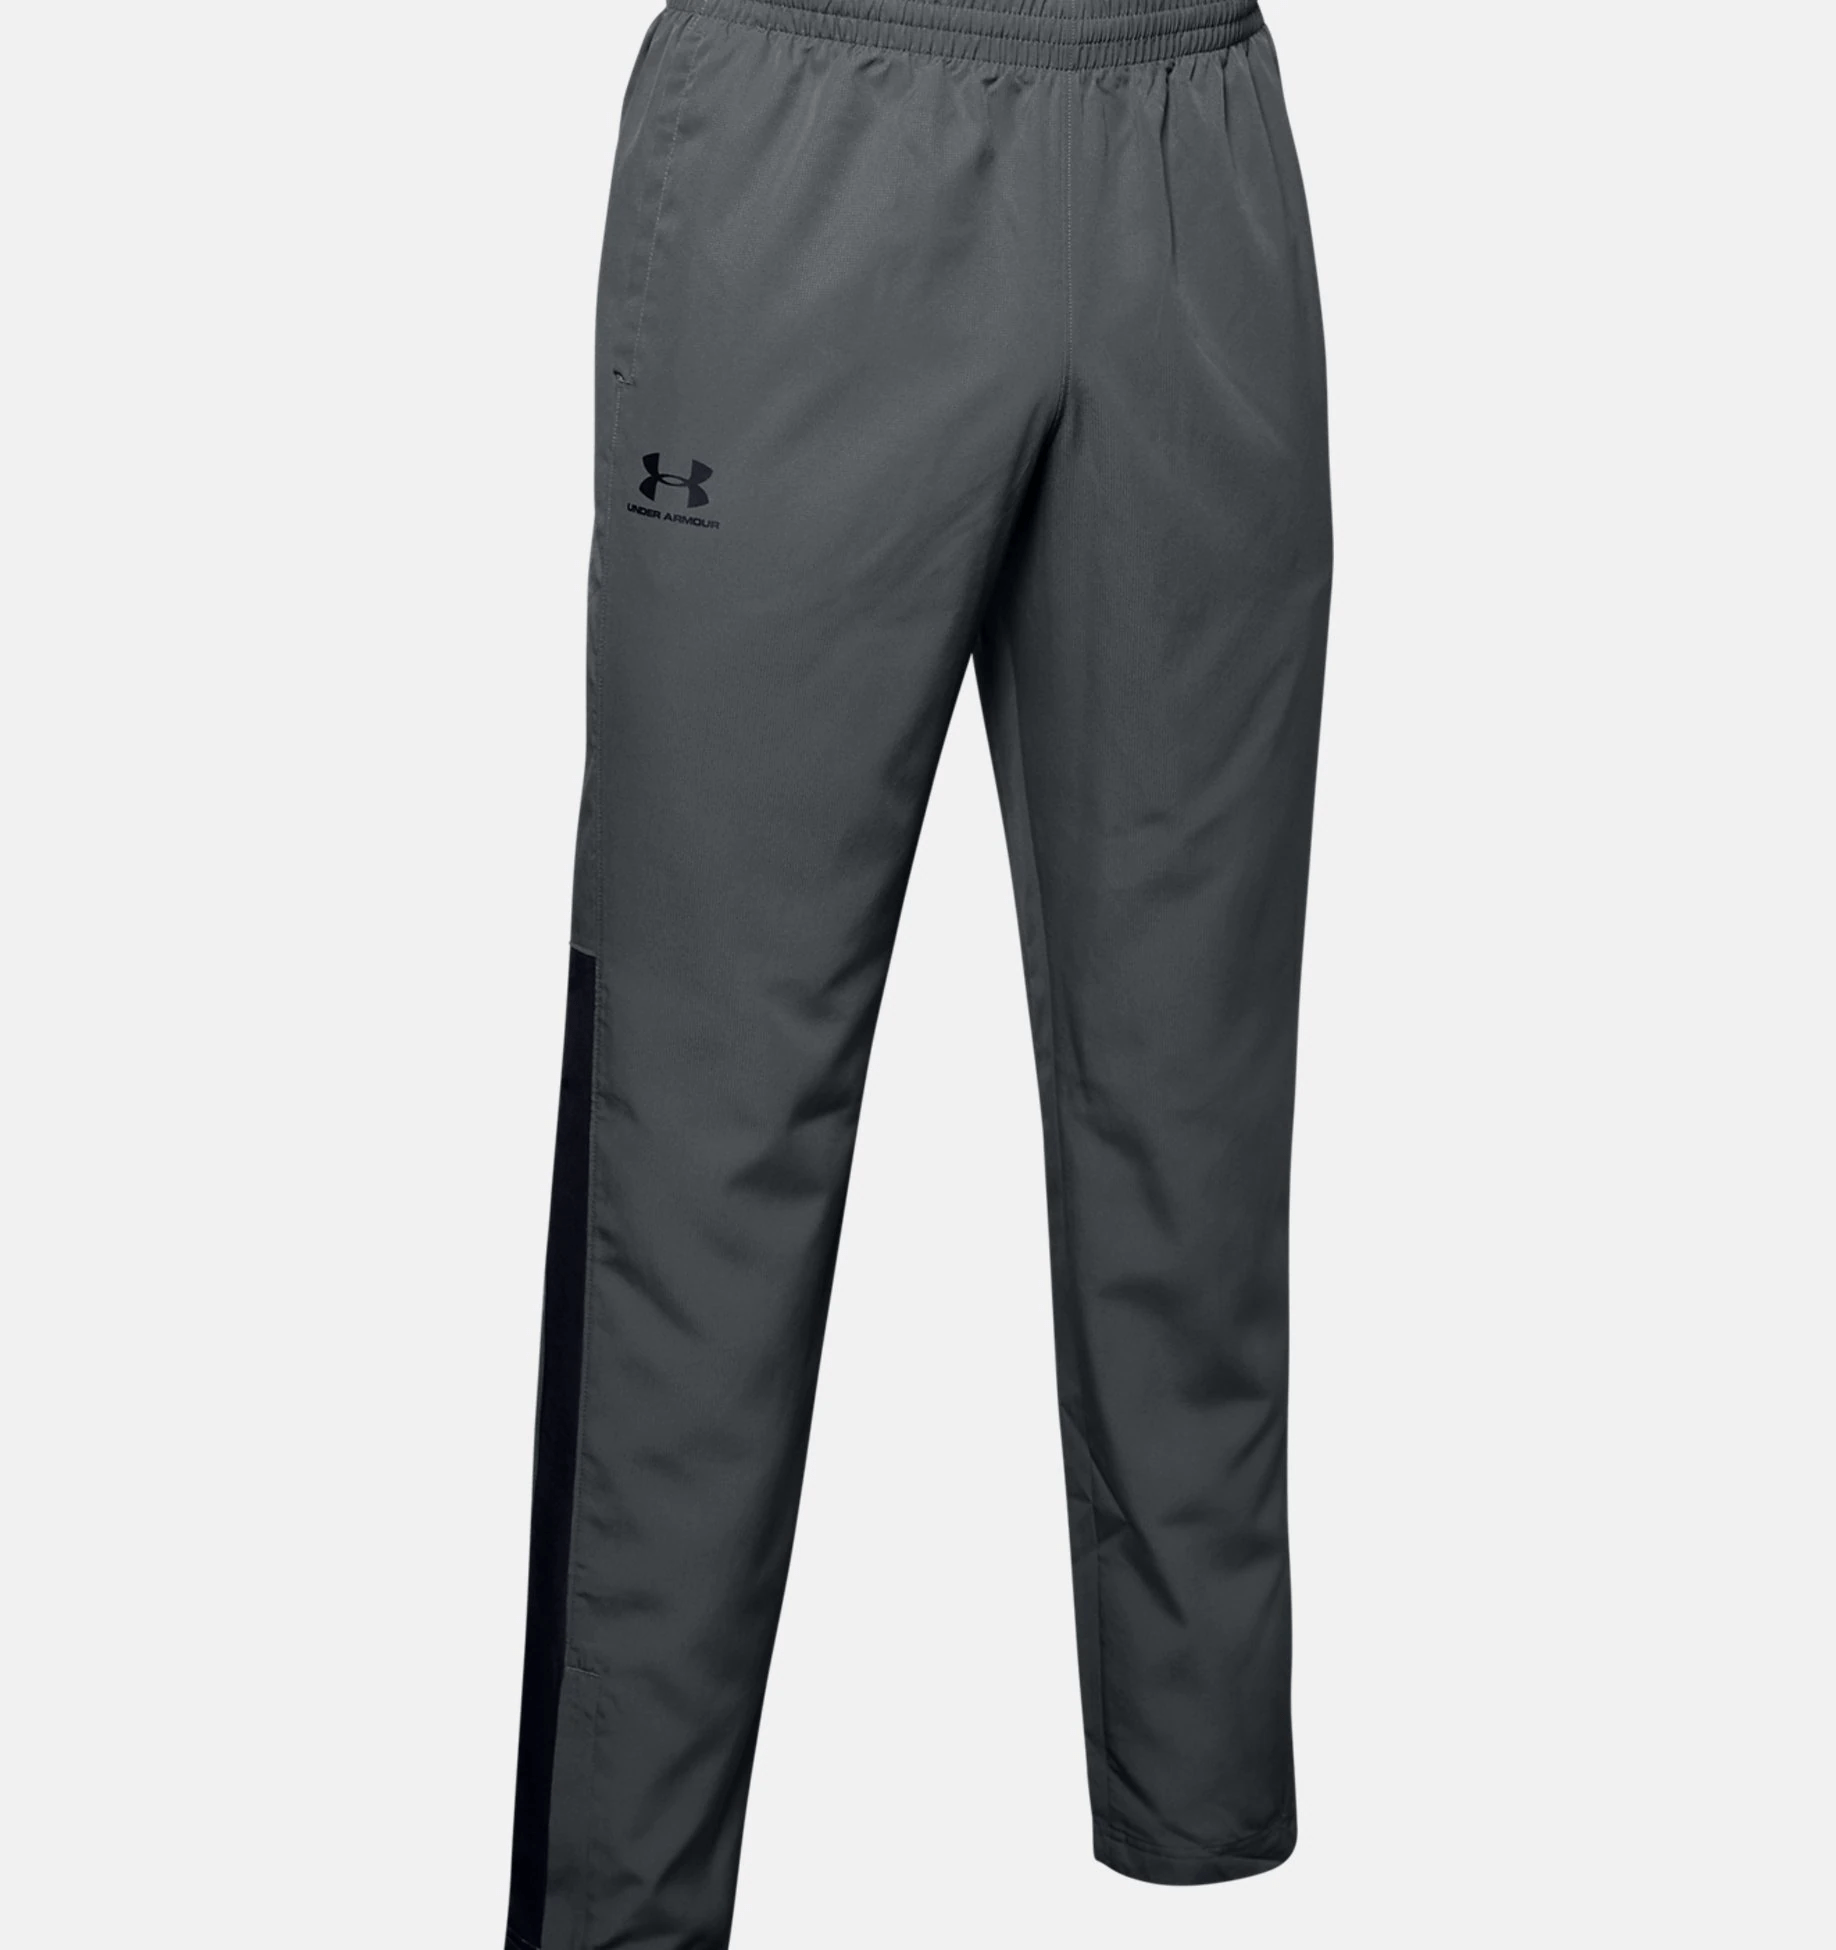 Under Armour Men's WG Woven Pants,True Gray Heather (025)/Steel, Medium :  : Clothing, Shoes & Accessories